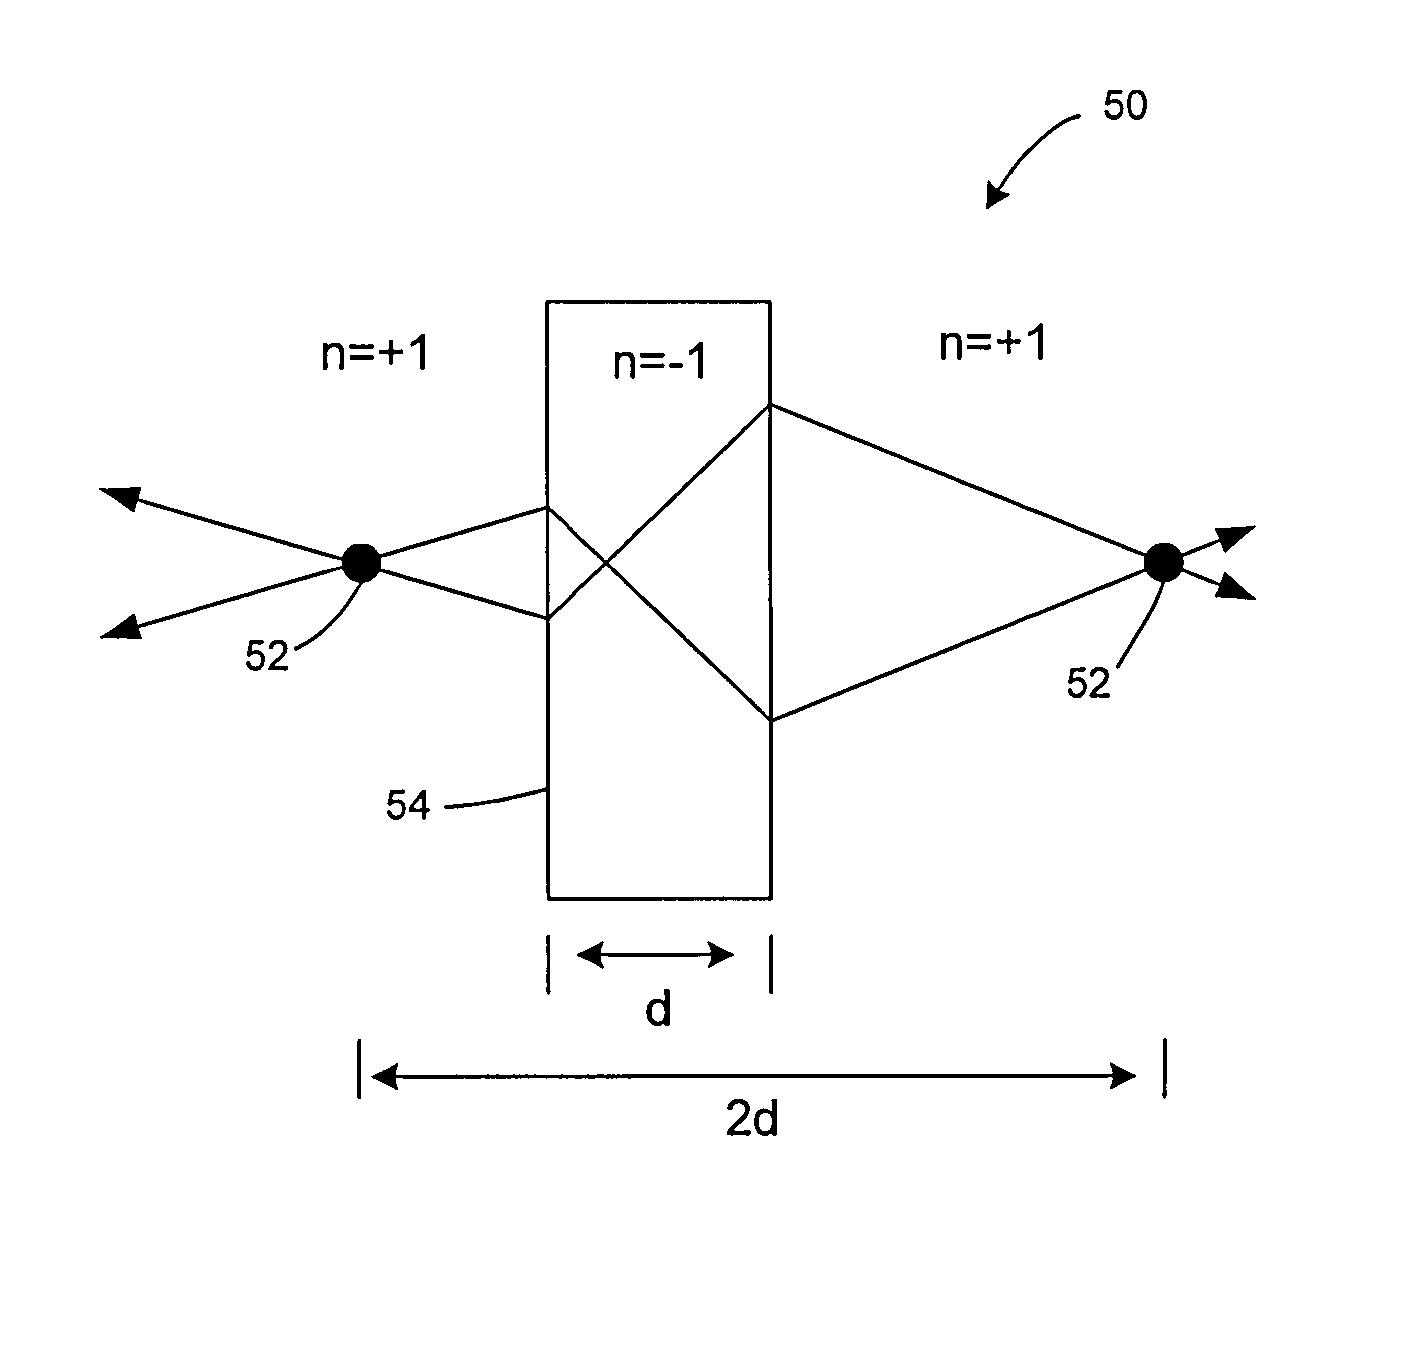 Quantum computing device and method including qubit arrays of entangled states using negative refractive index lenses